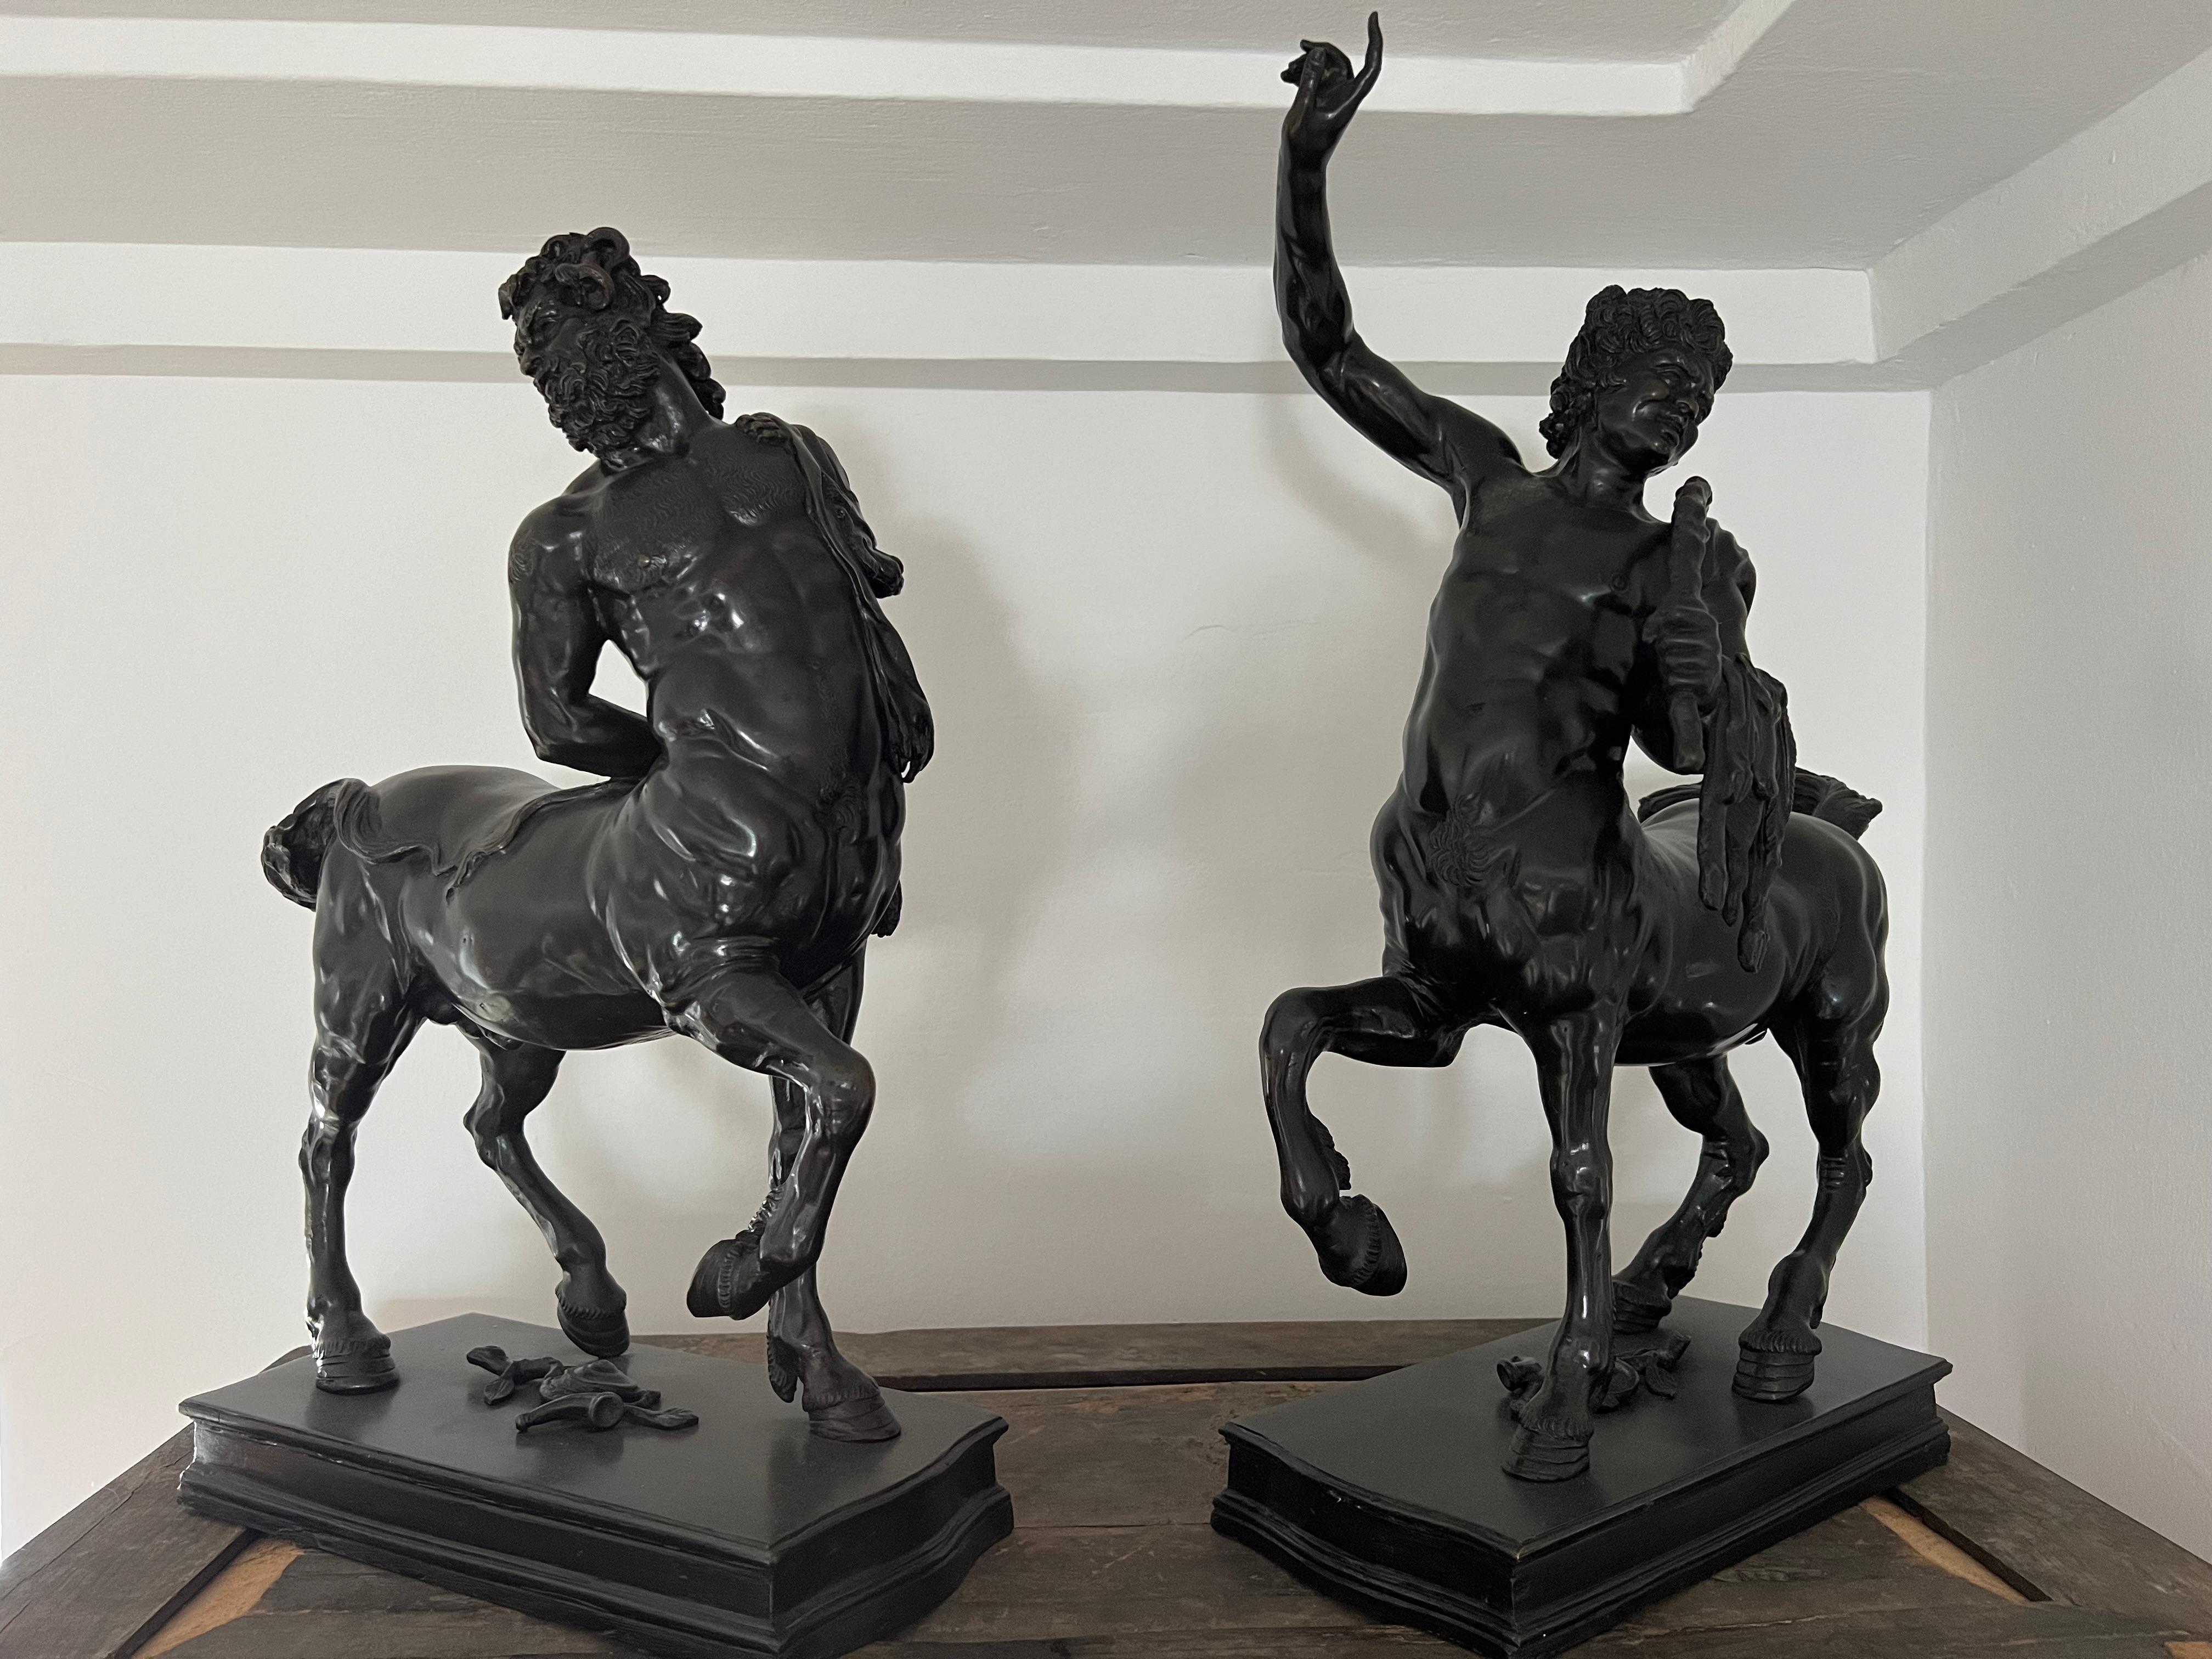 Beautifully cast bronze copies of the Furietti Centaurs, one elder and one younger. Each is mounted on a bronze base and both are unsigned with no foundry marks. These bronzes are copies of the two Roman (or Hellenistic) monumental marble versions